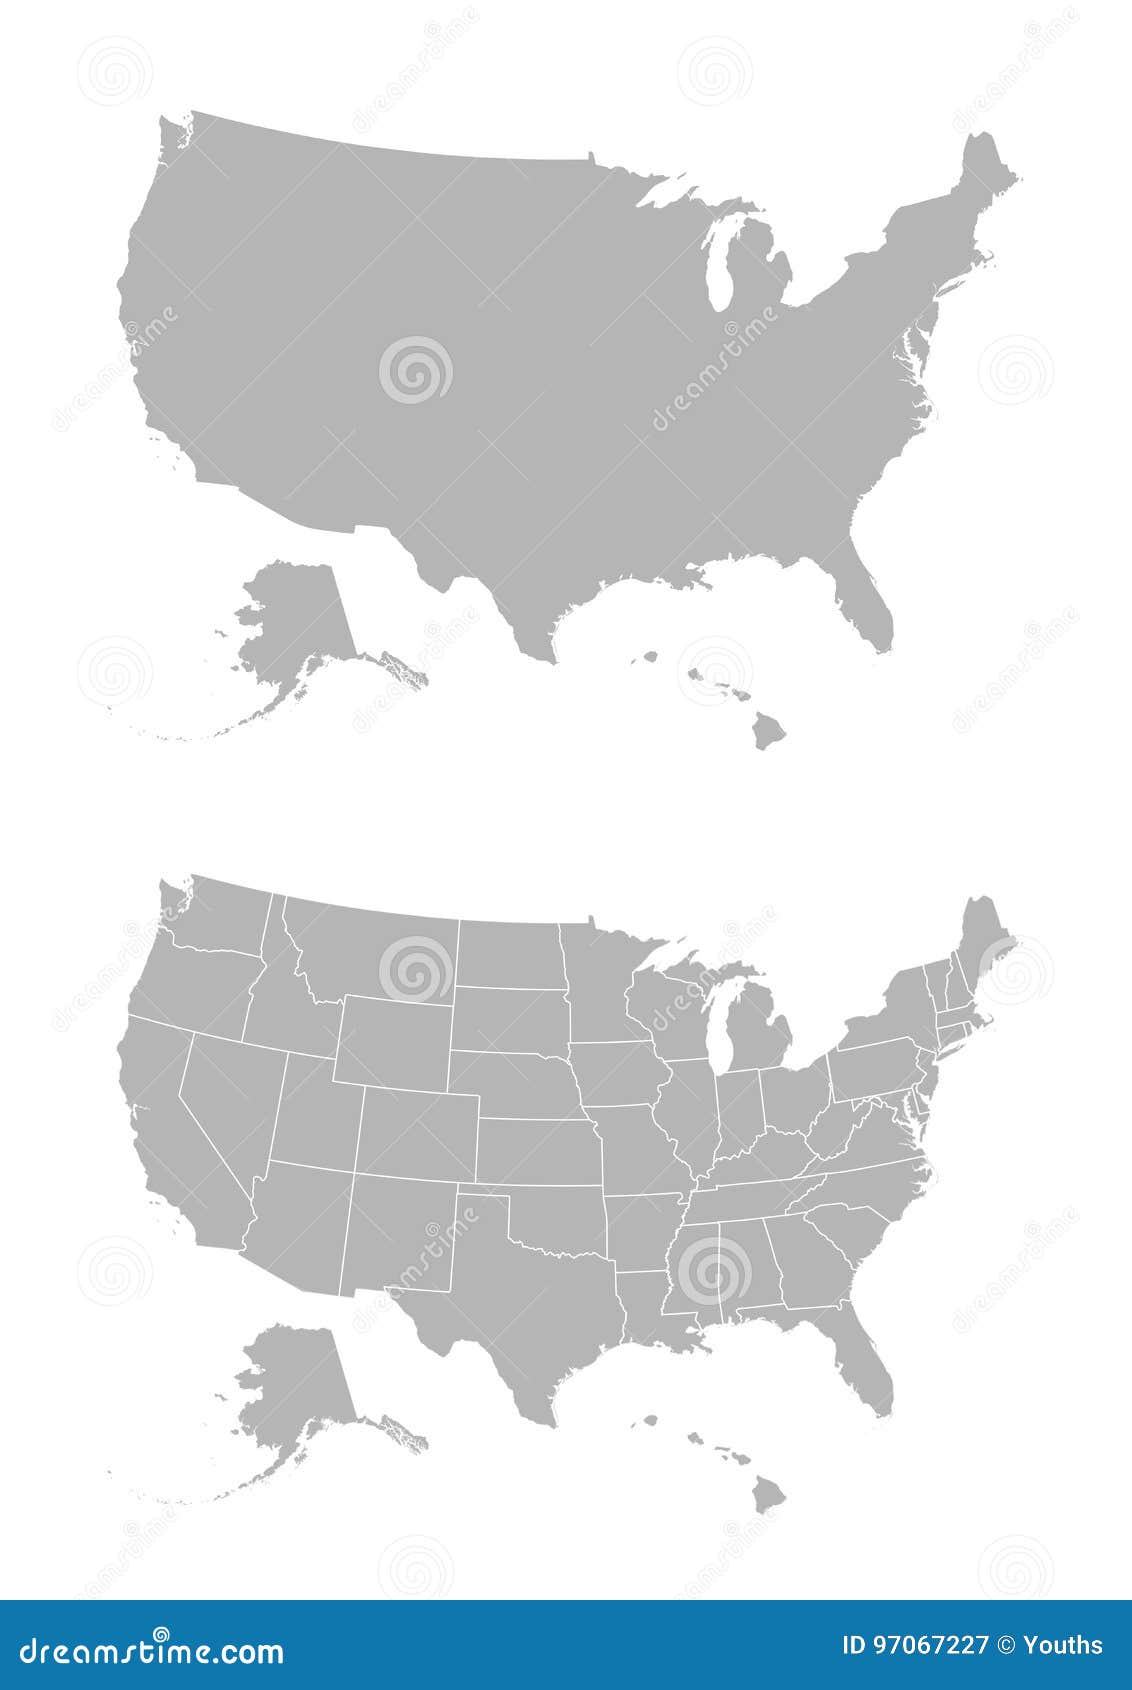  map of the united states of america